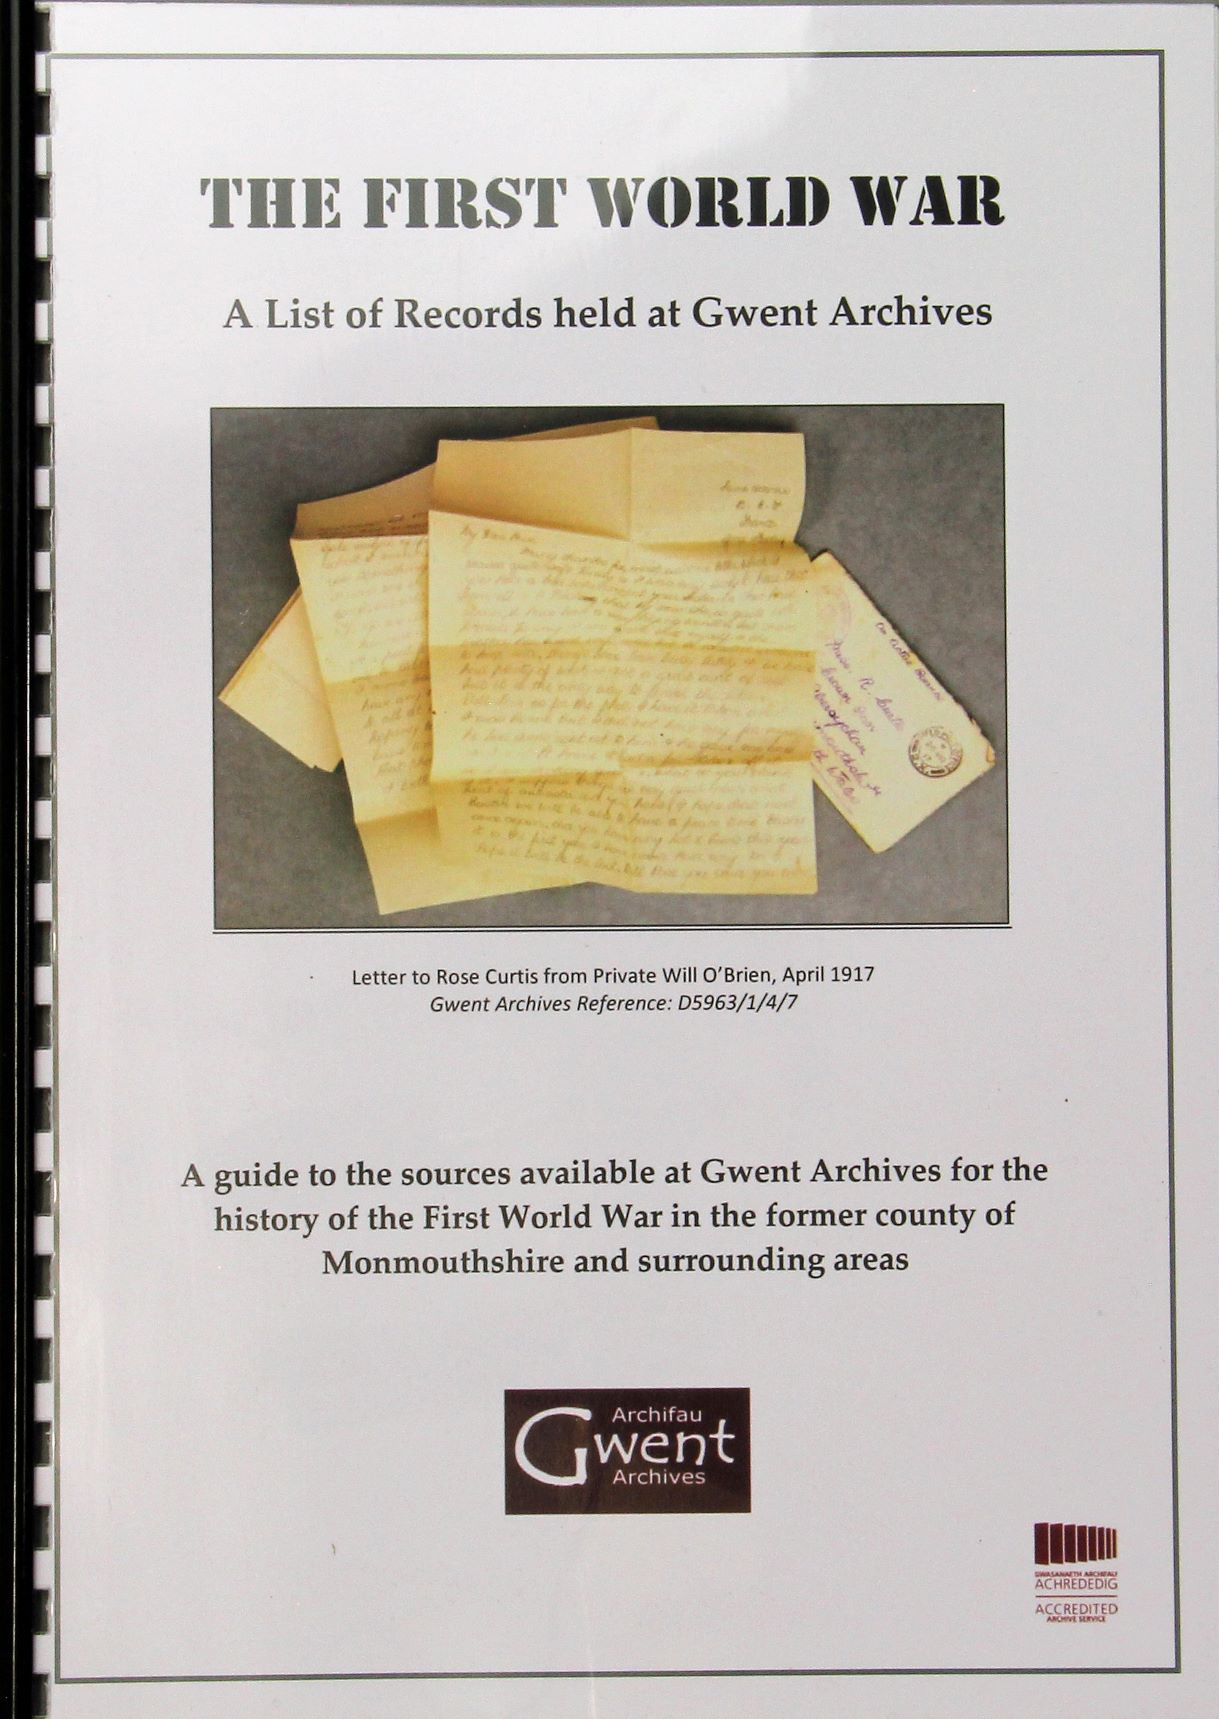 The First World WarL A List of Records Held at Gwent Archives, £2.00